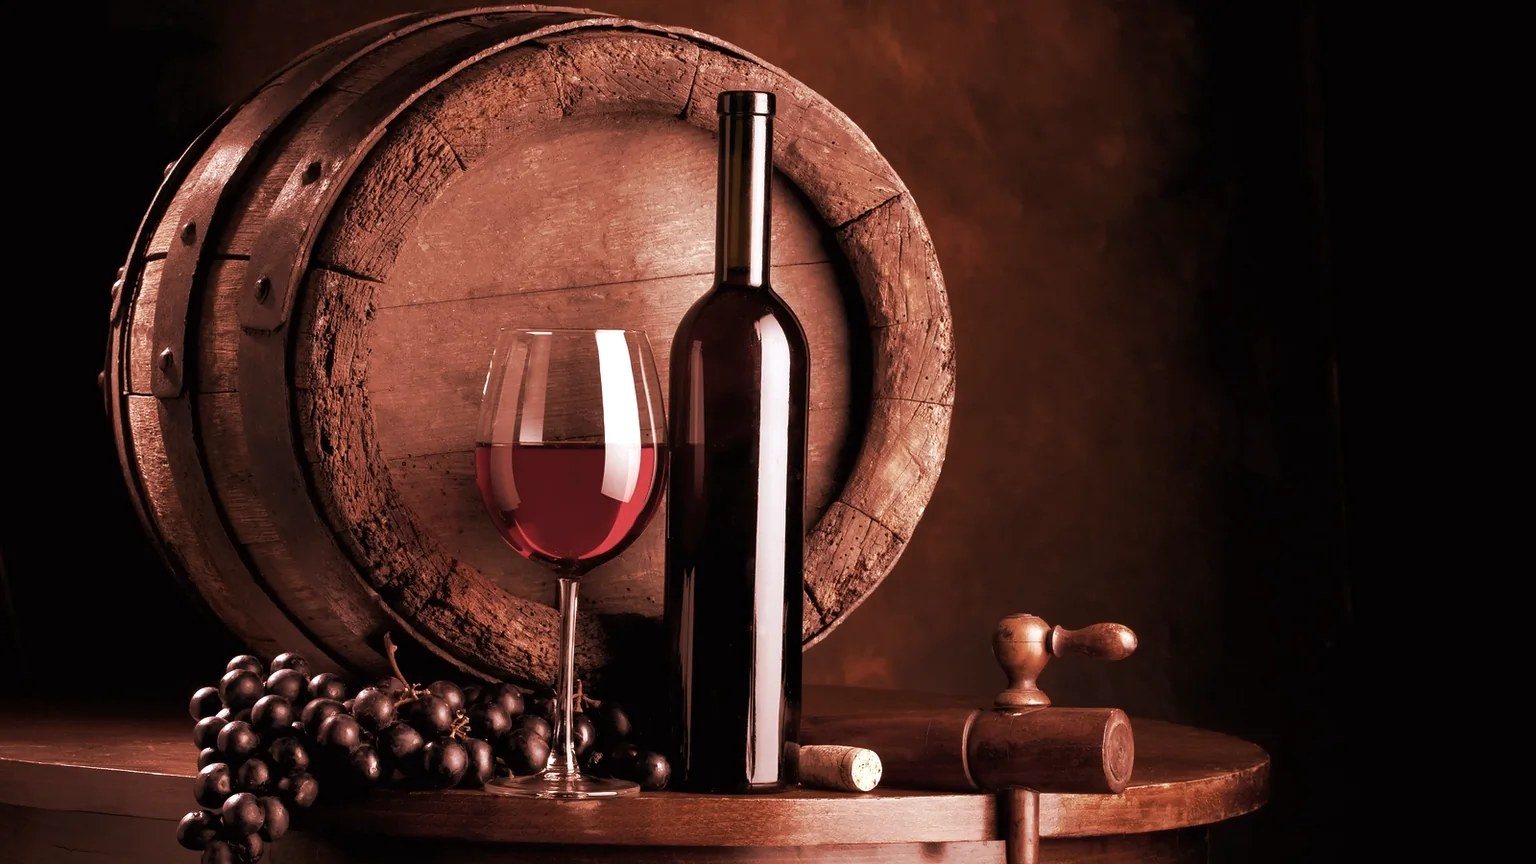 You can now buy wine with Bitcoin. Image: Shutterstock